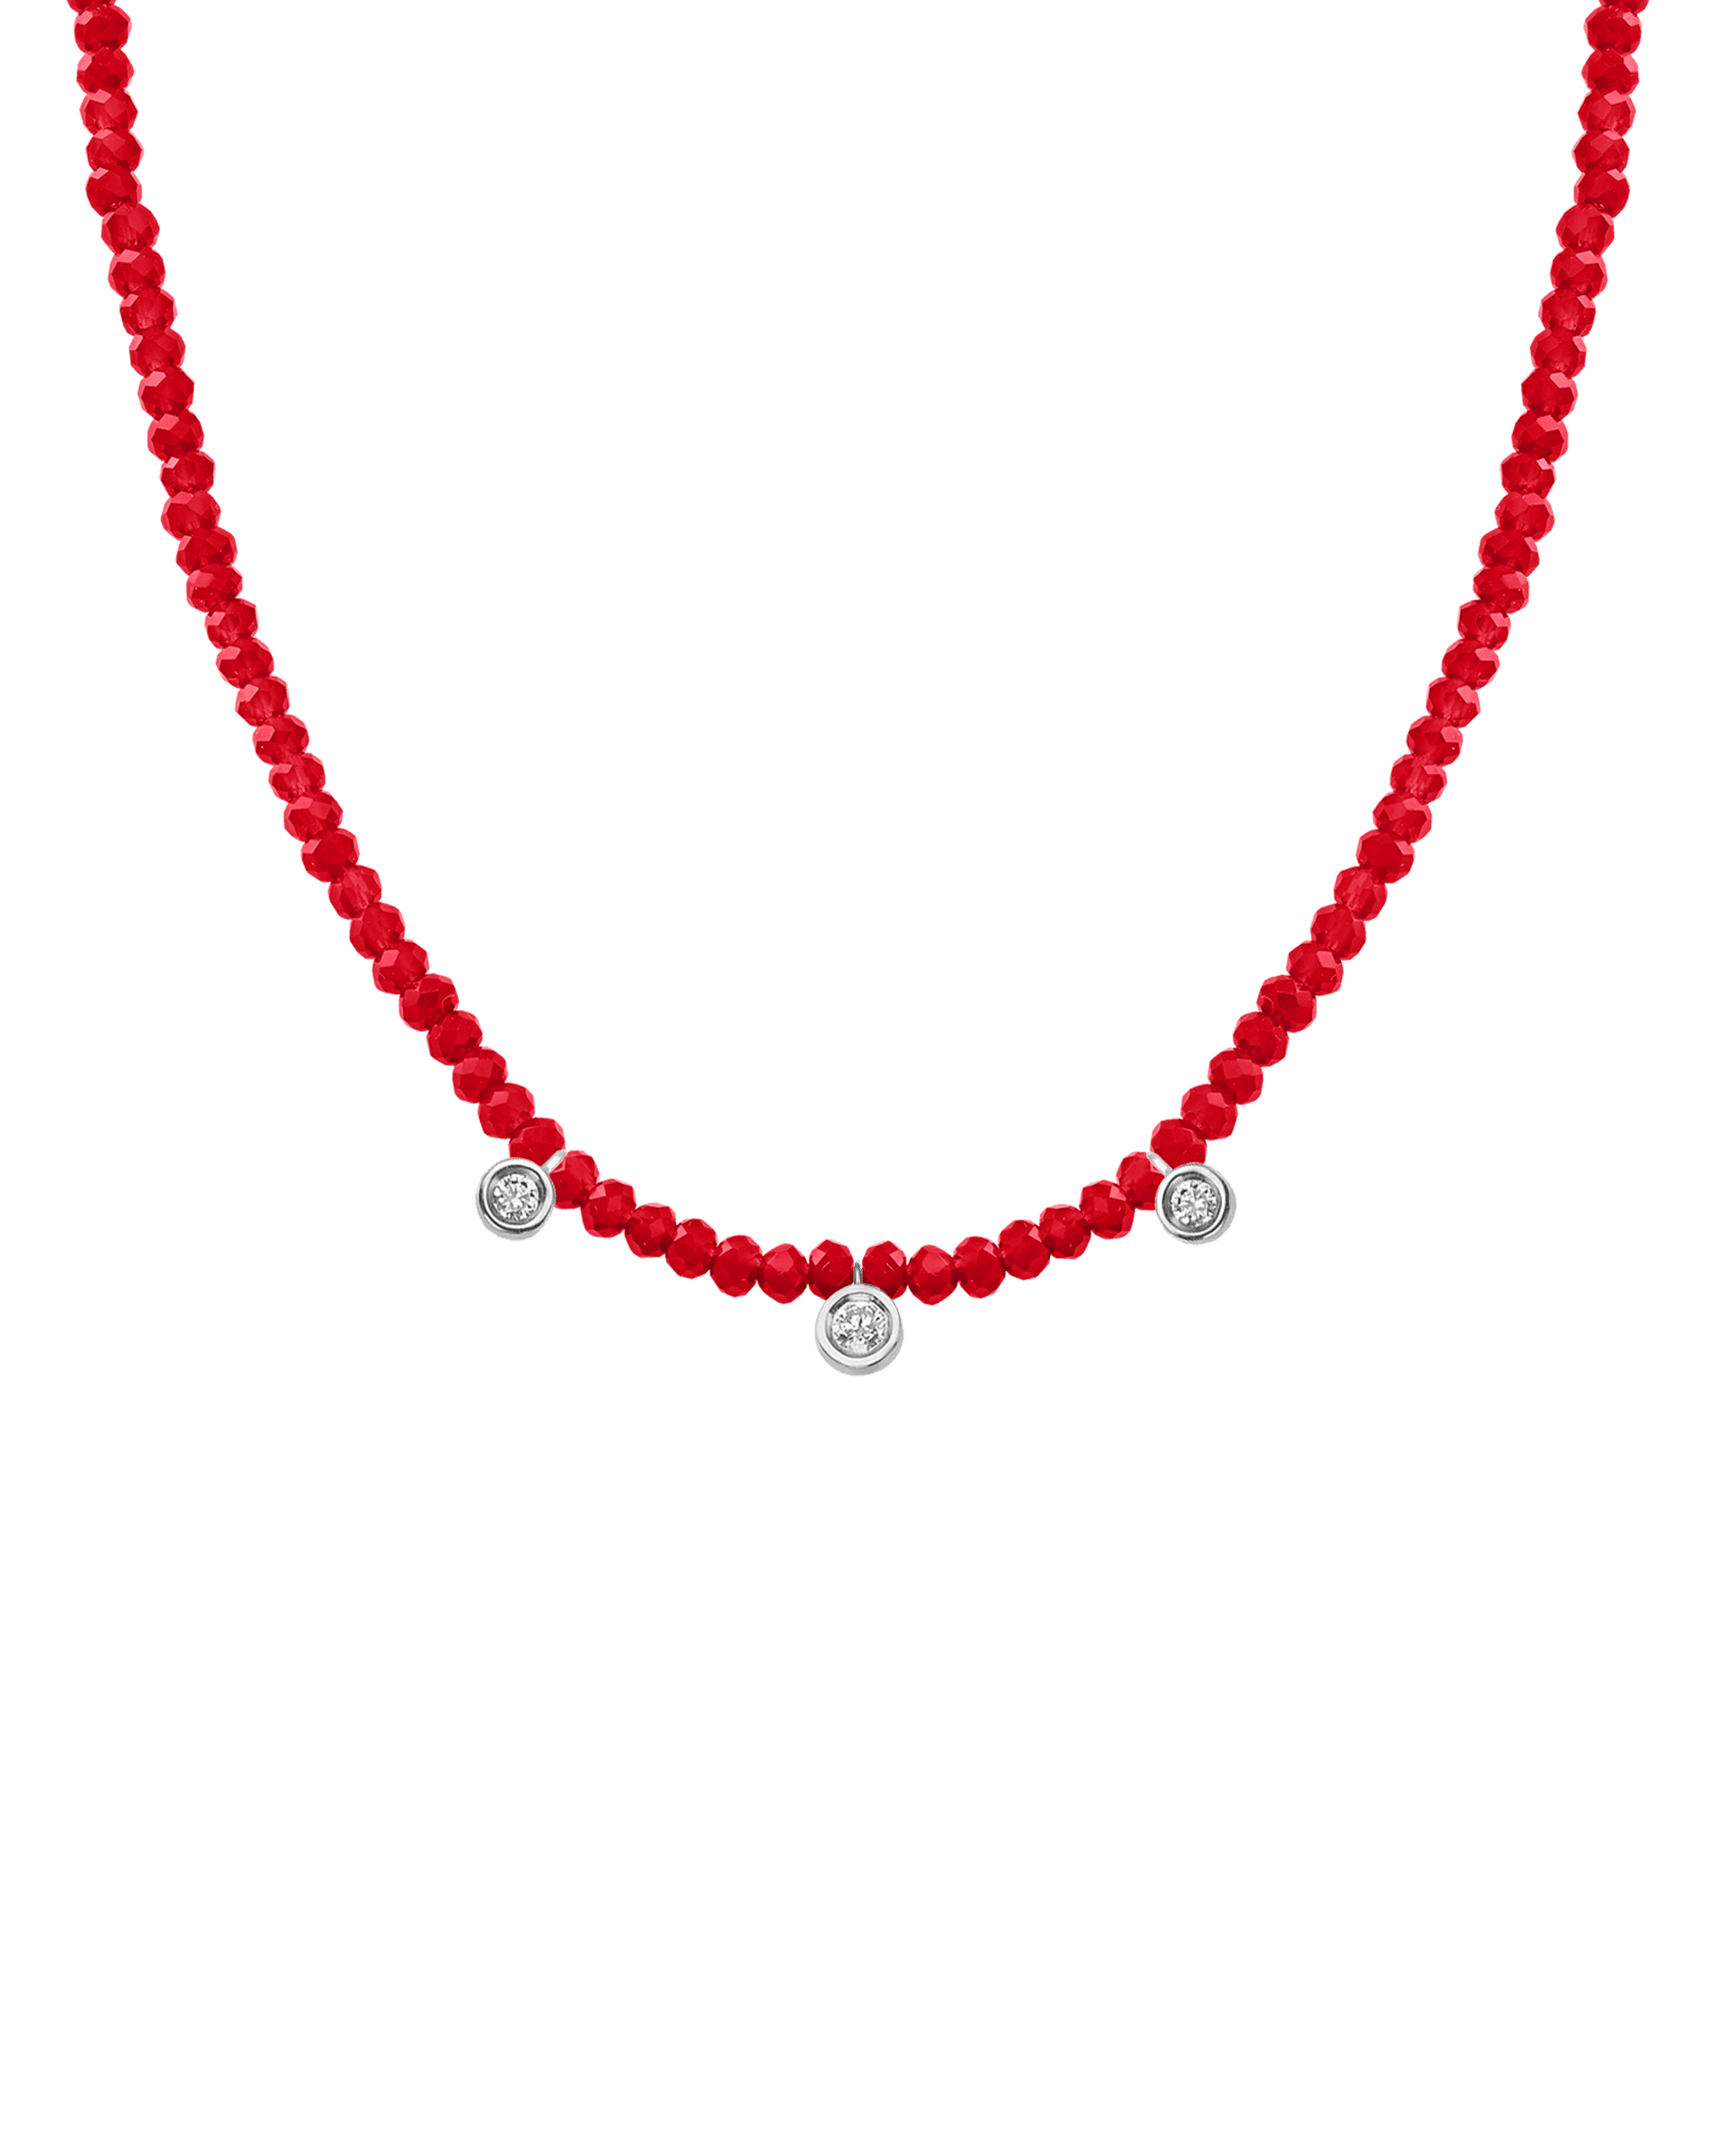 Emerald Gemstone & Three diamonds Necklace - 14K White Gold Necklaces magal-dev Natural Red Jade 14" - Collar 